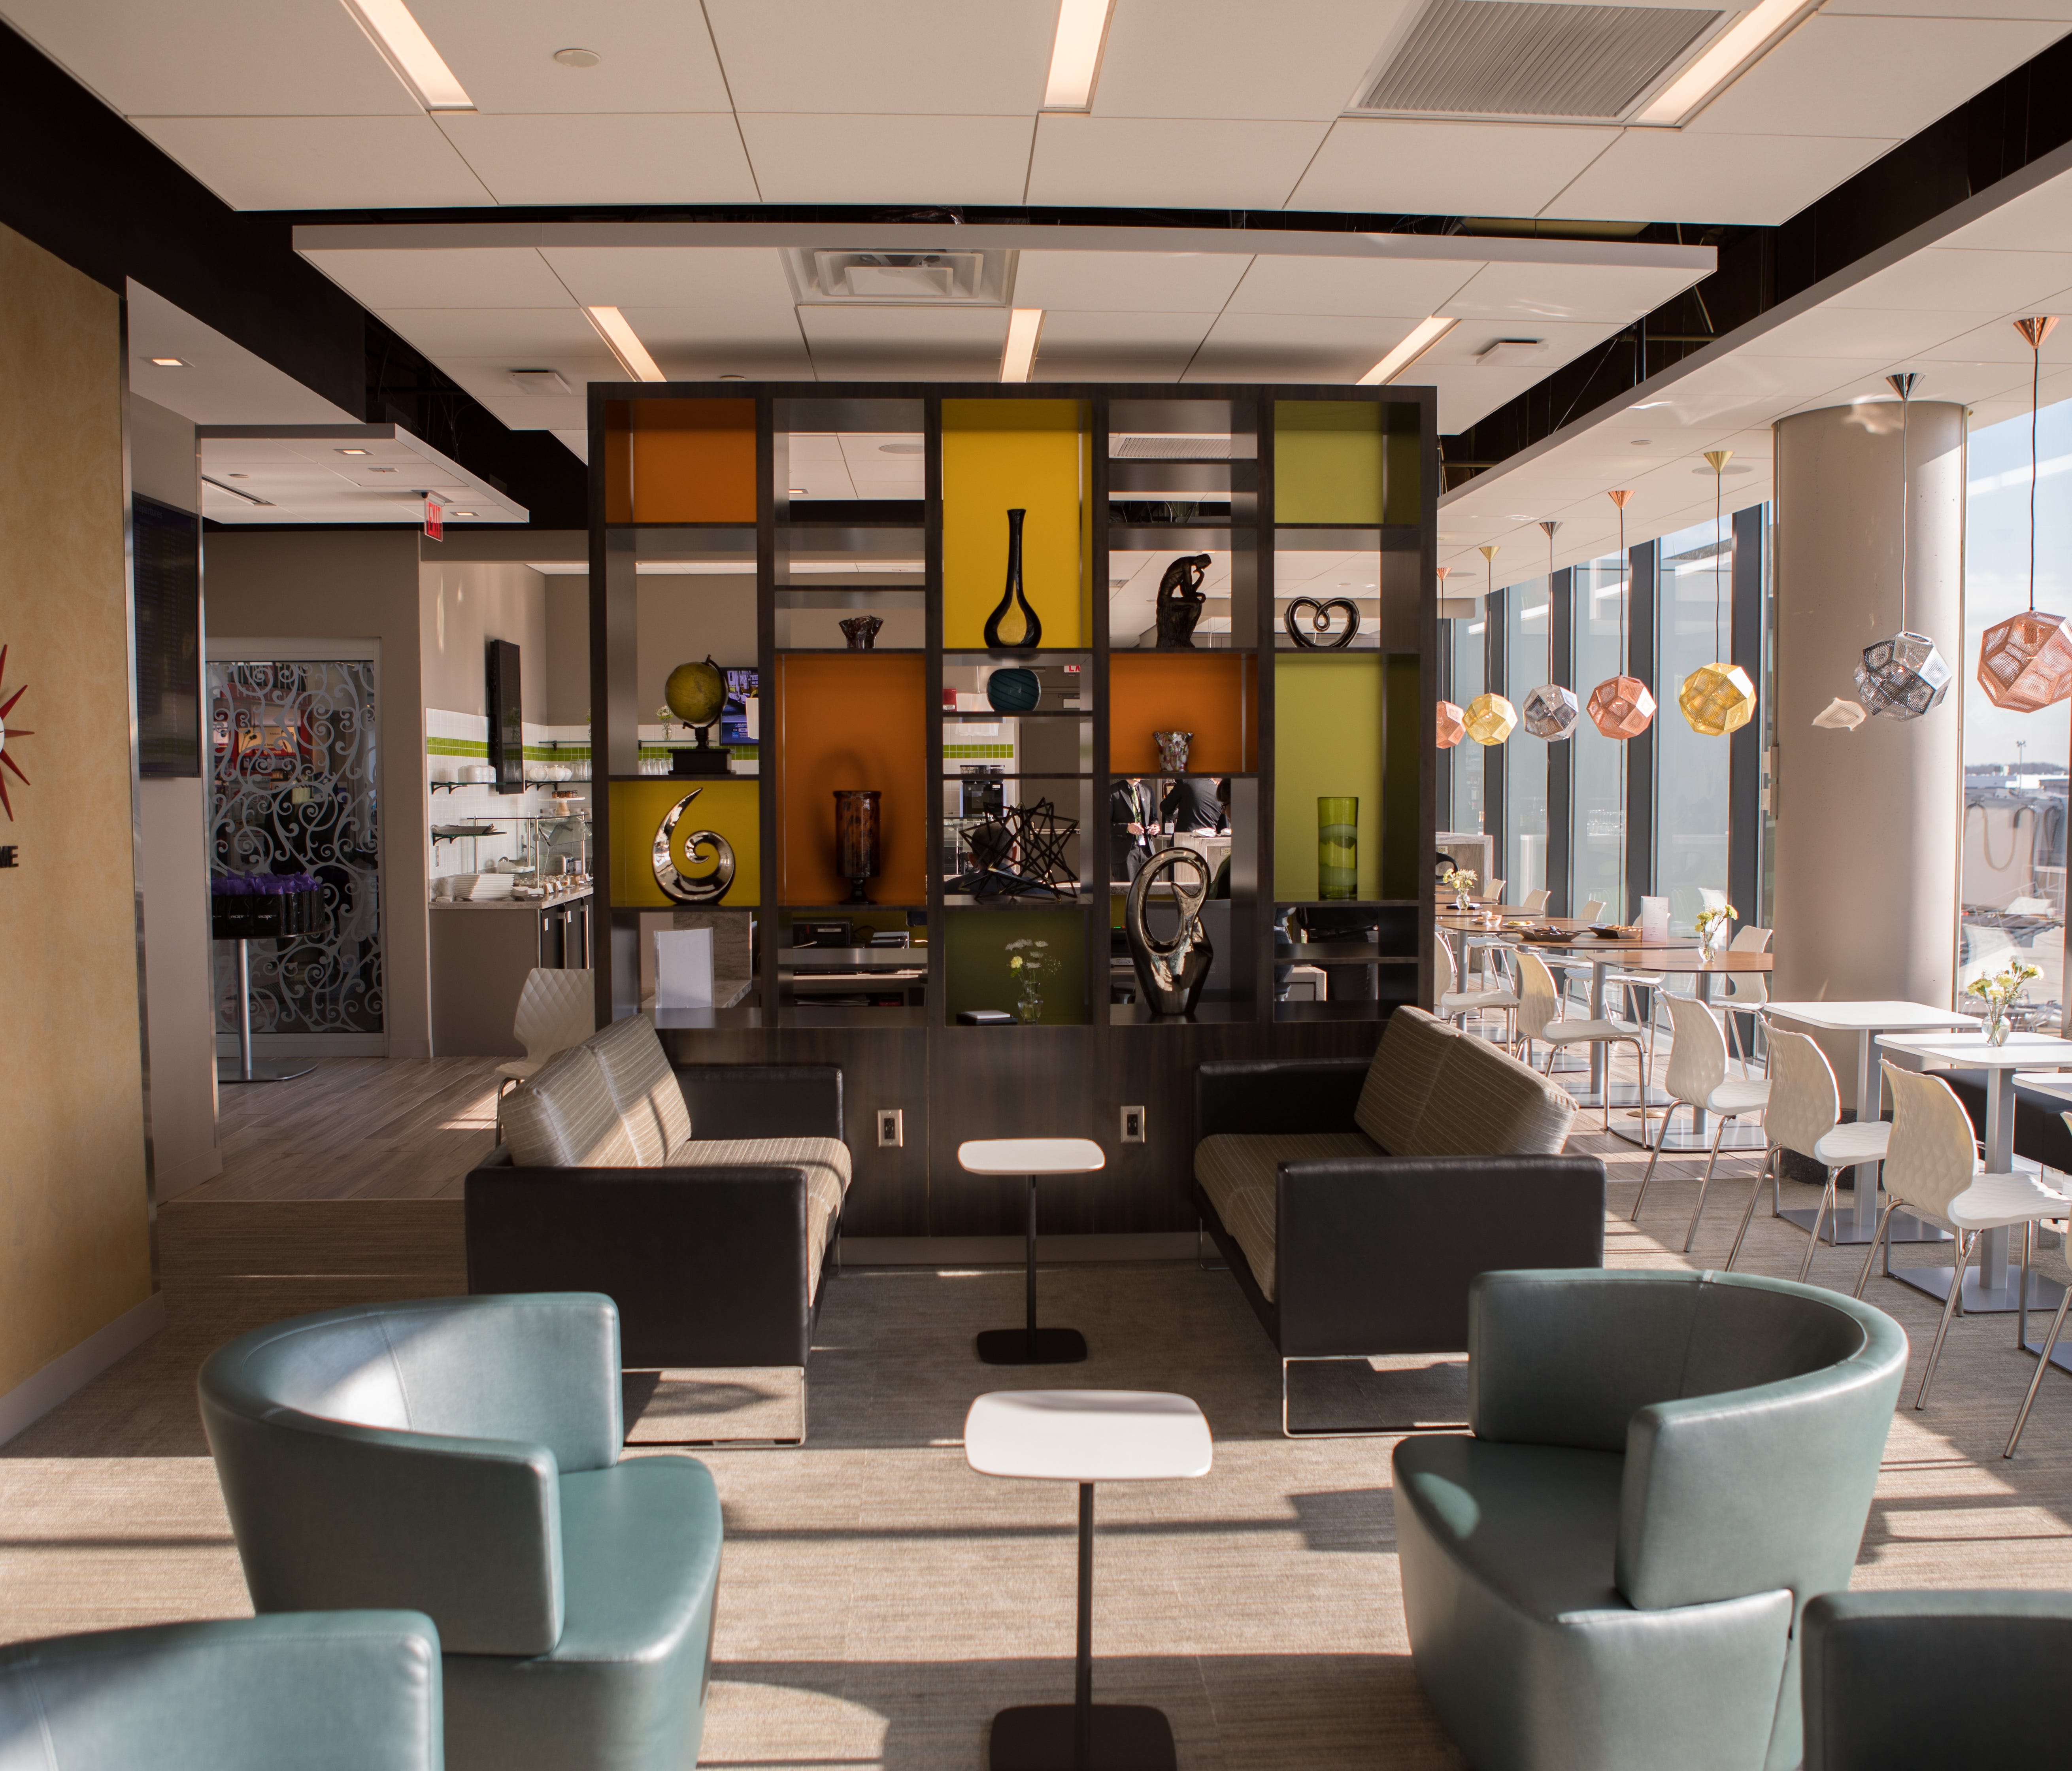 To accommodate the new international customers, Bradley International Airport added a branch of the pay-per-use Escape Lounge